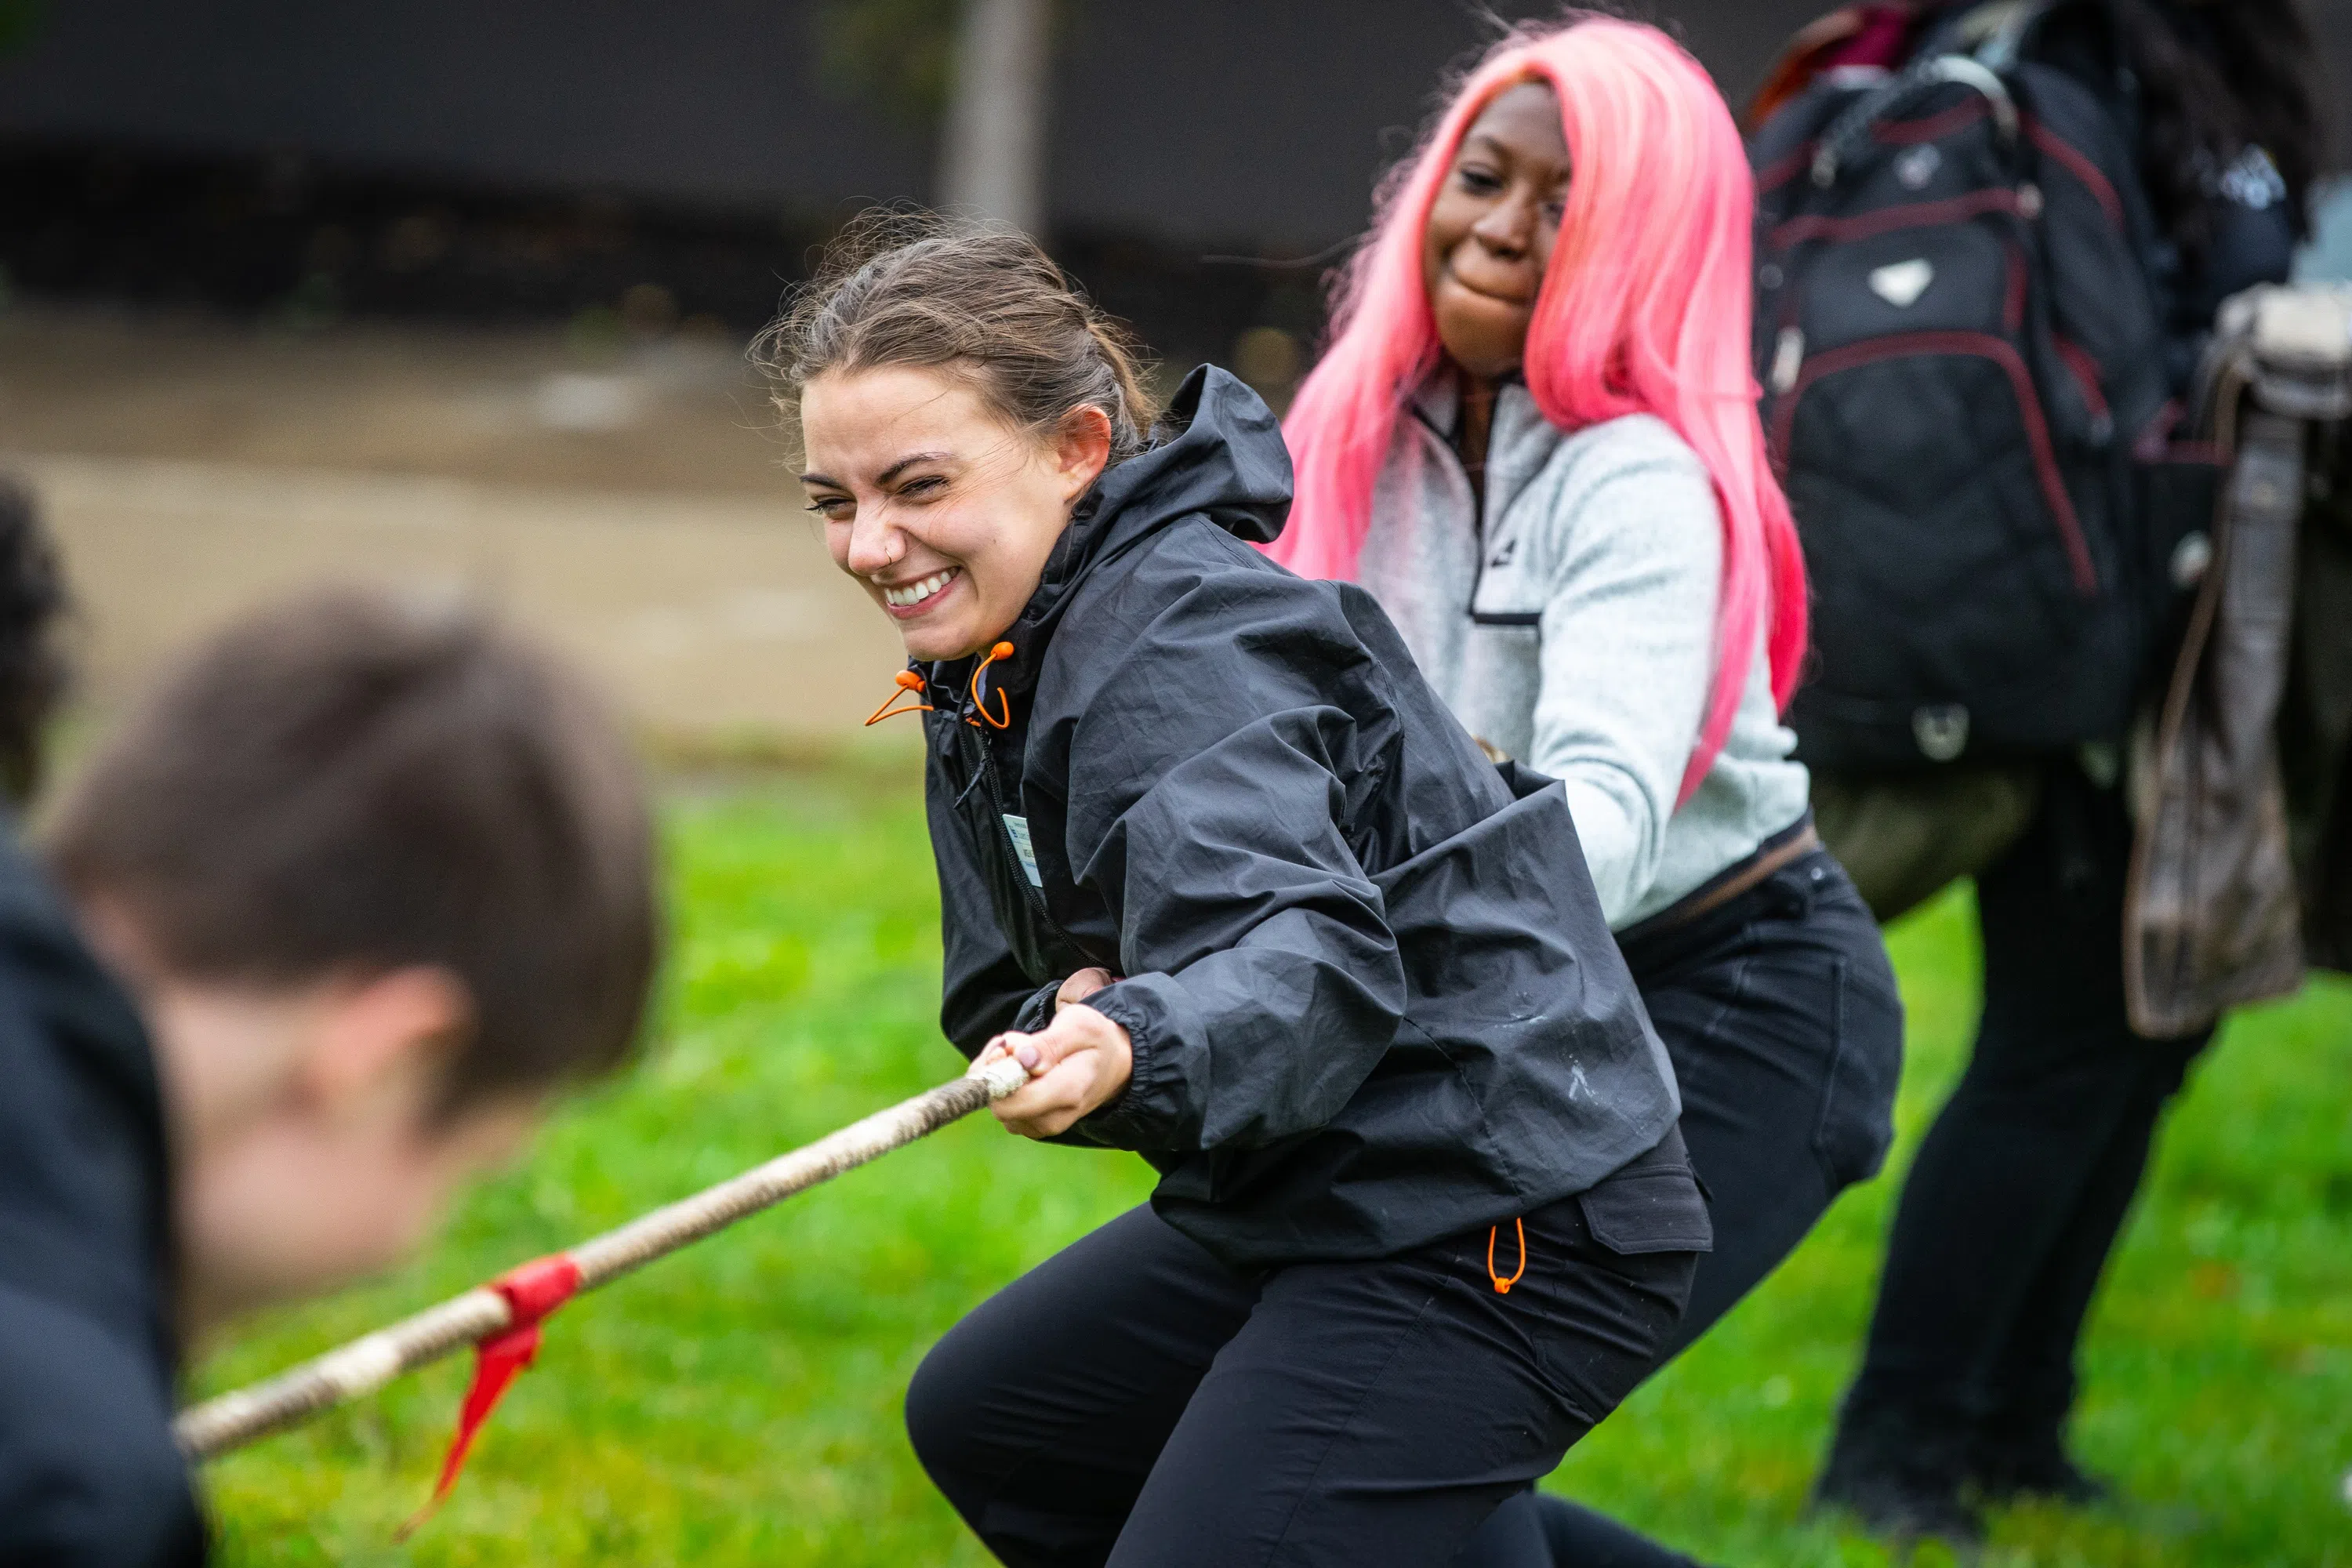 Students participate in tug of war, part of Club Olympics, an event hosted by the Student Association (SA).